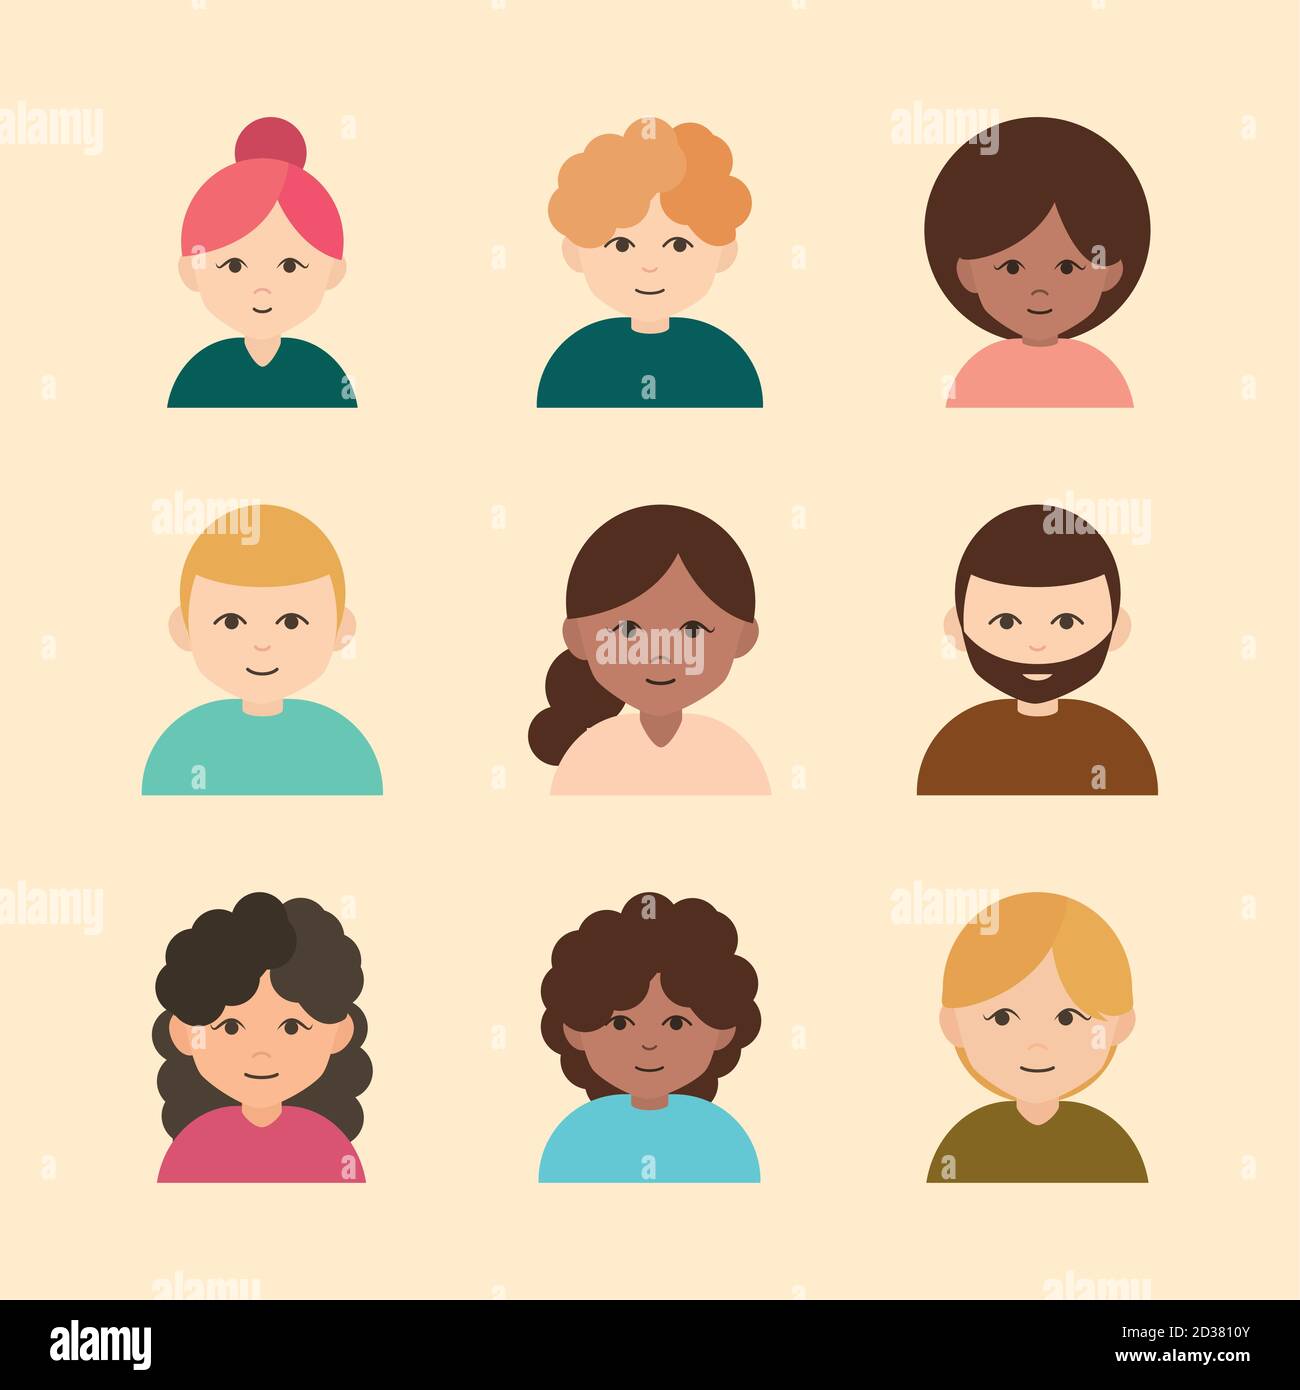 People Icons Set. Team Concept. Diverse business men avatar icons. Vector  illustration of flat design people characters. Stock Vector